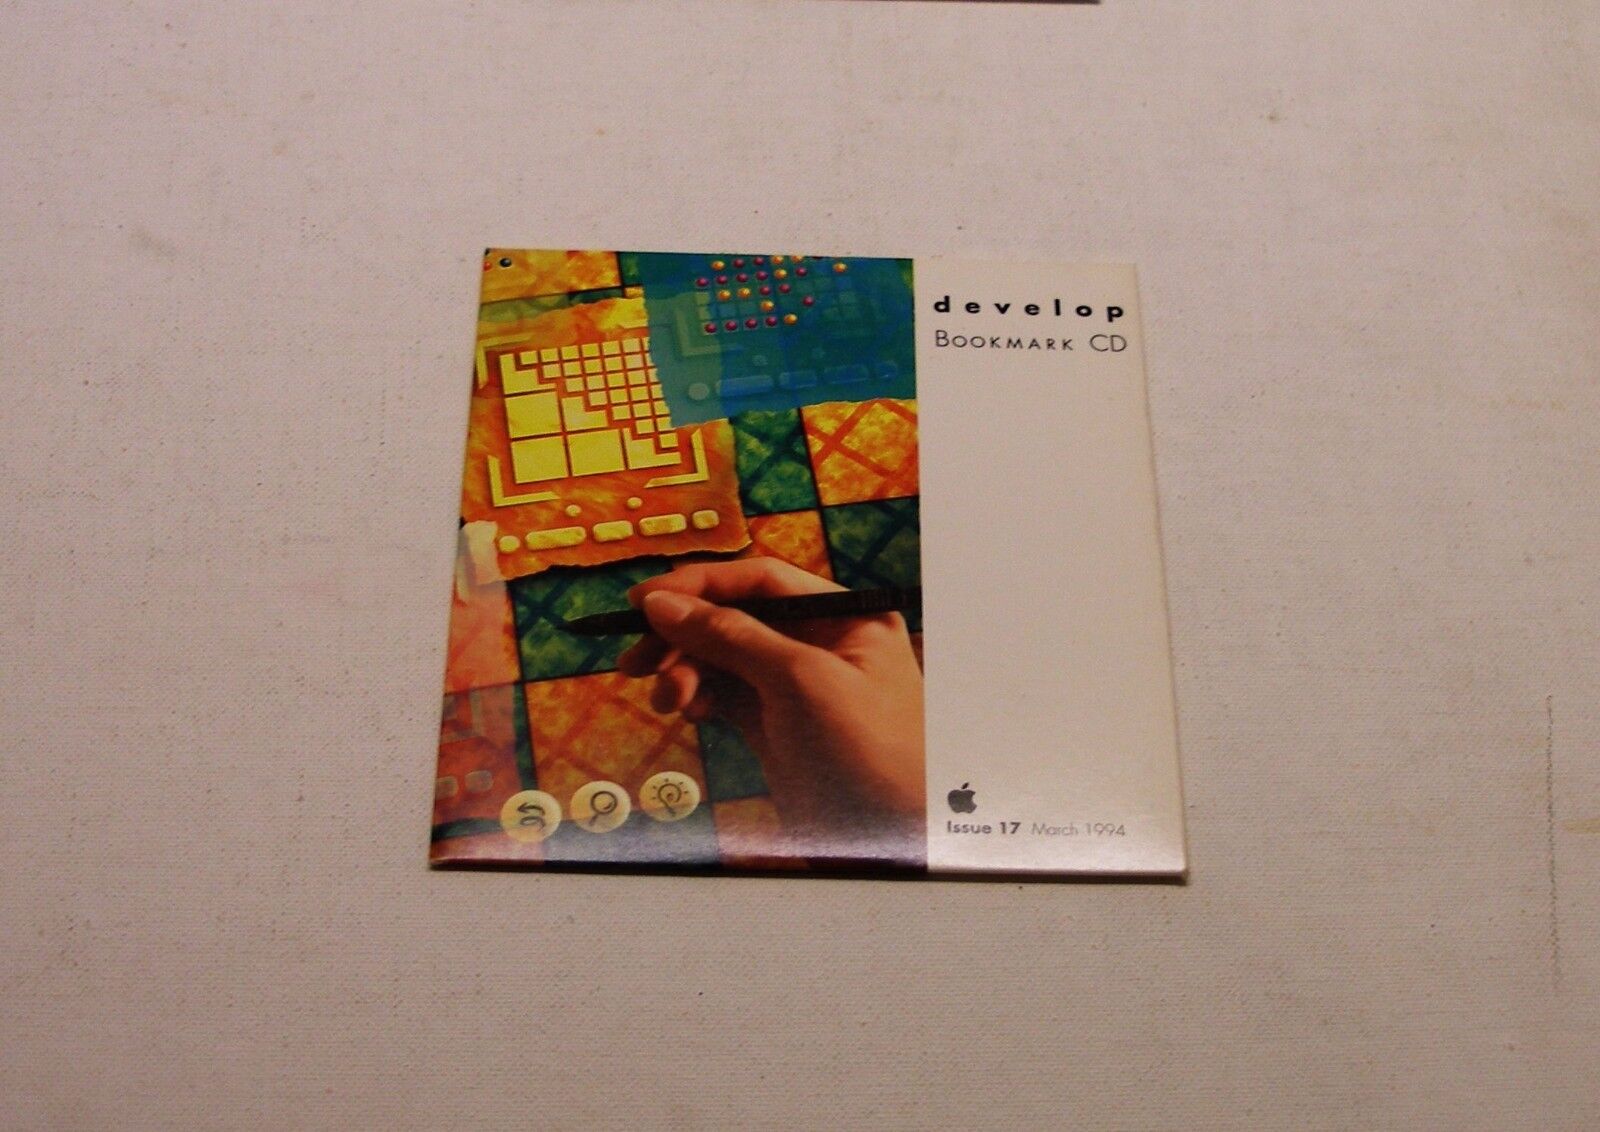 Develop Bookmark CD Issue 17 March 1994 by Apple Computer